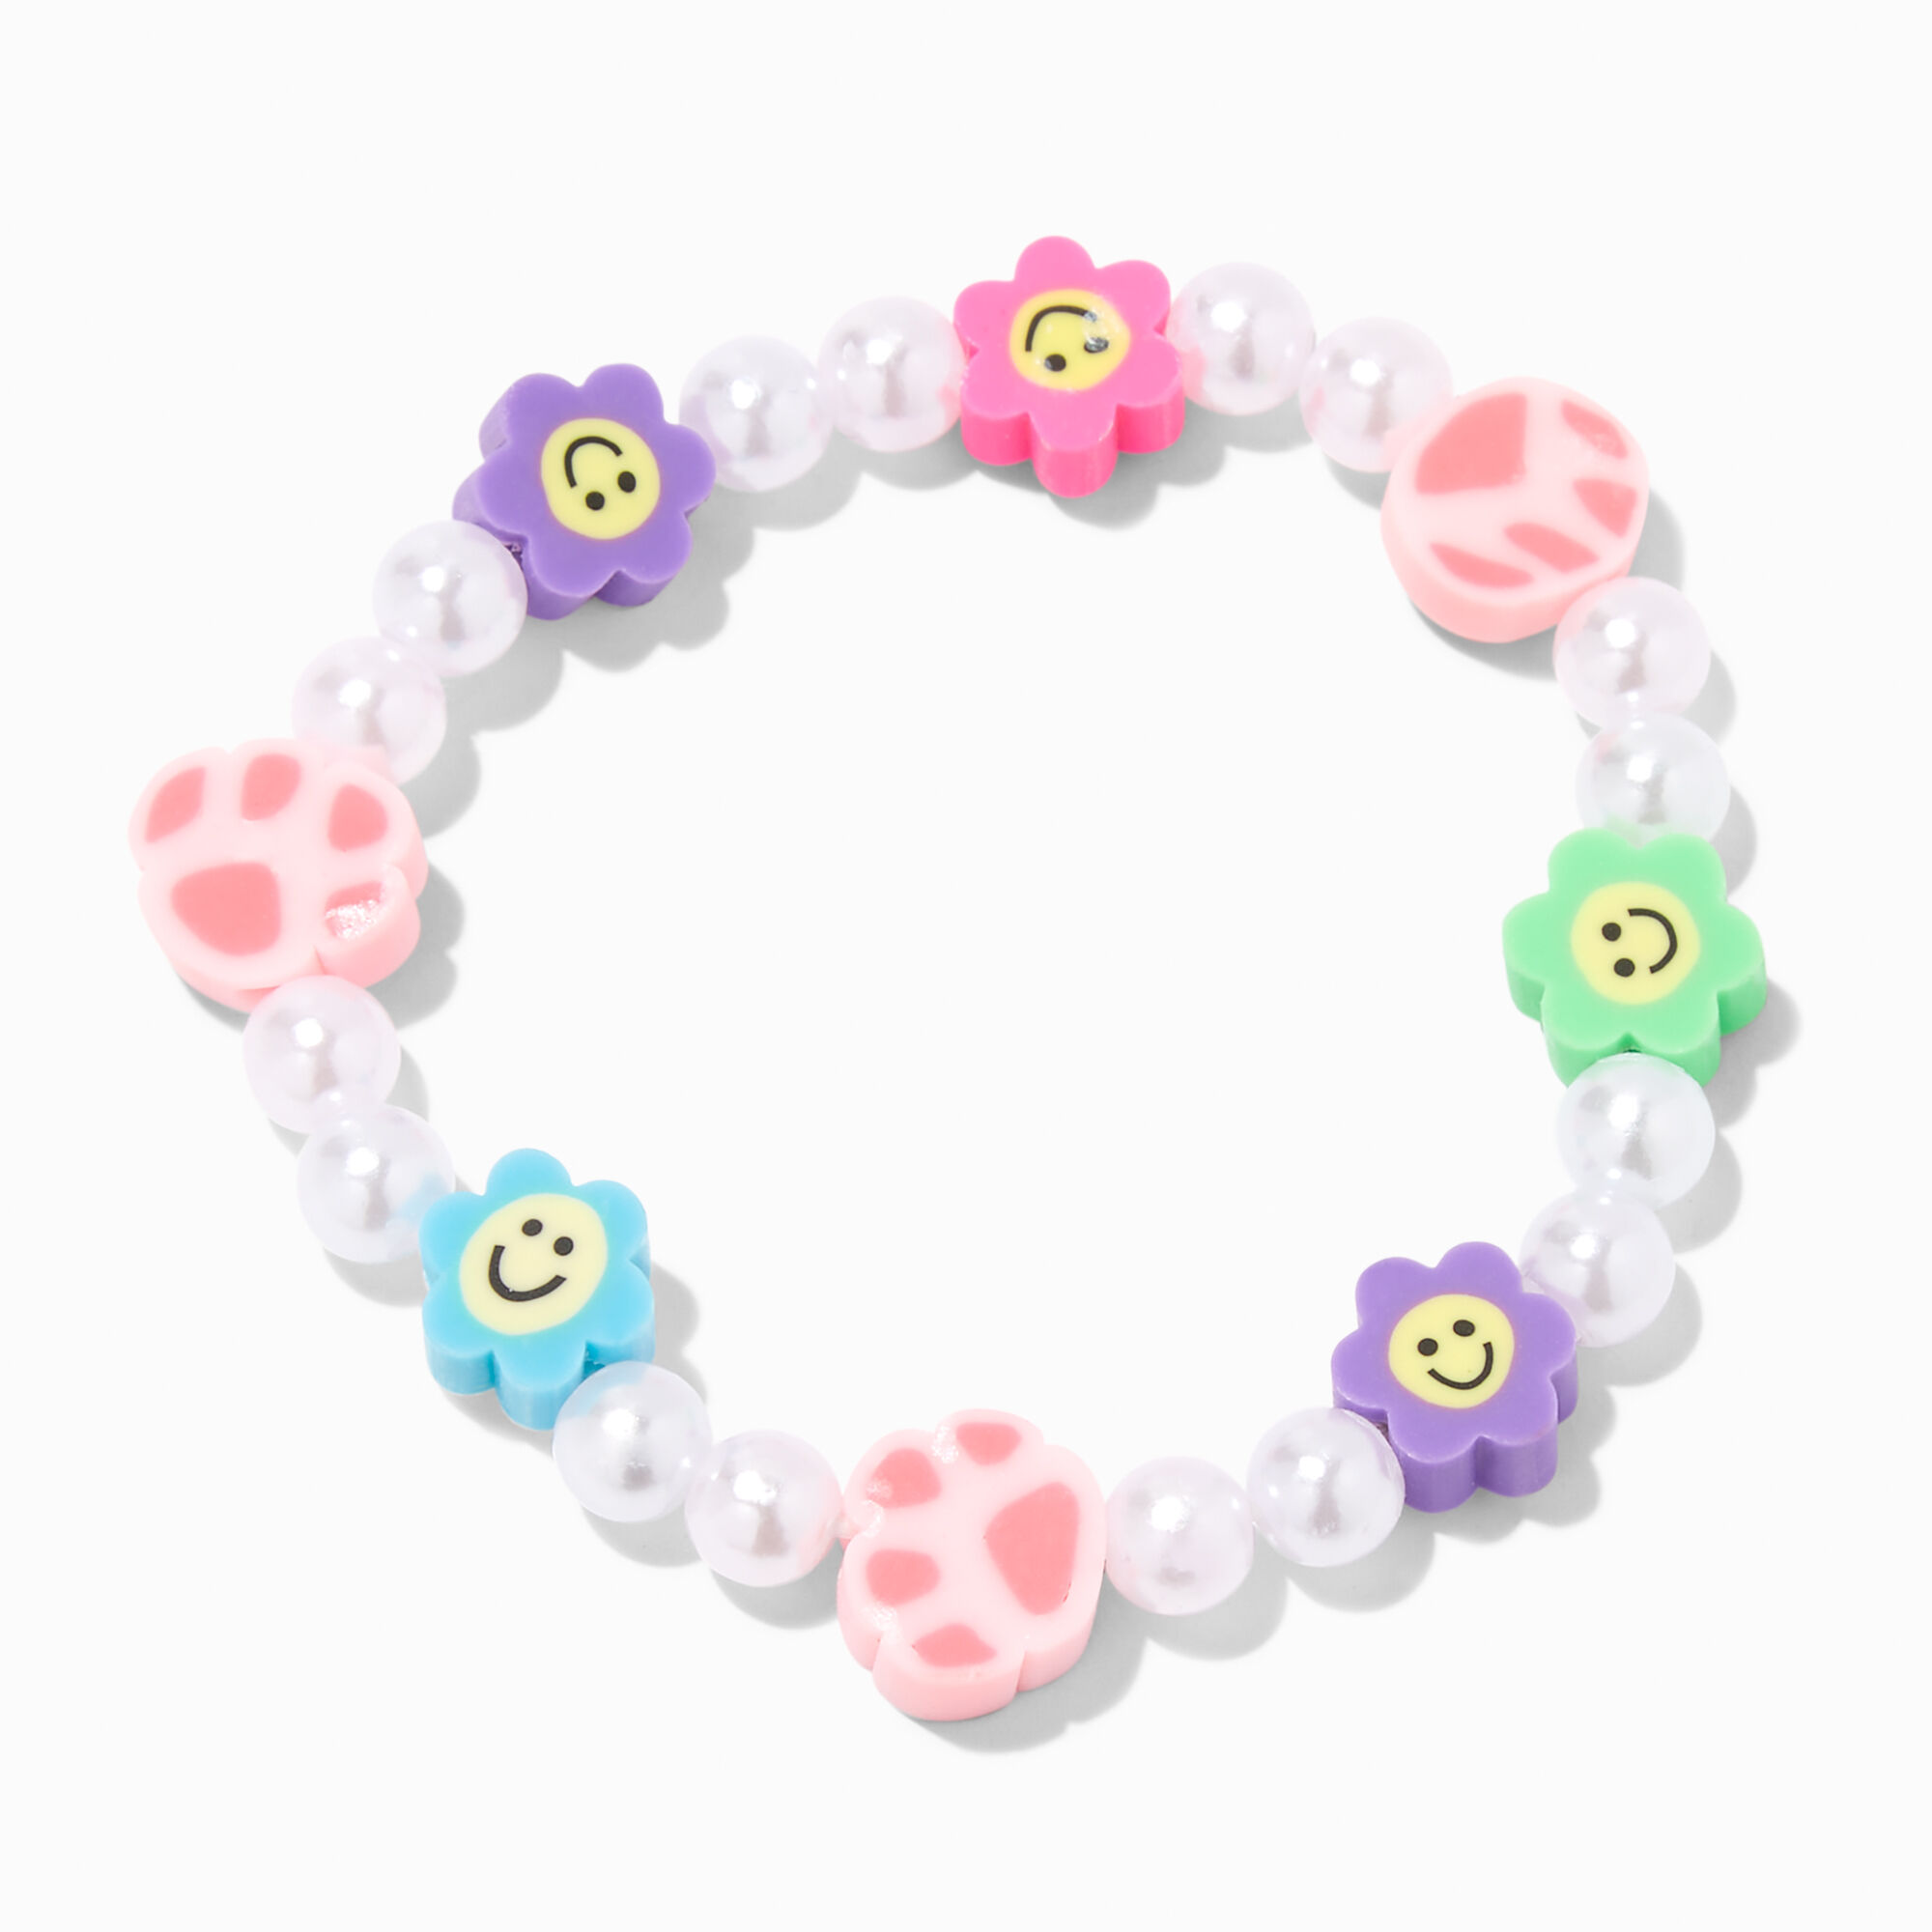 View Claires Happy Smile Daisy Paws Beaded Stretch Bracelet information